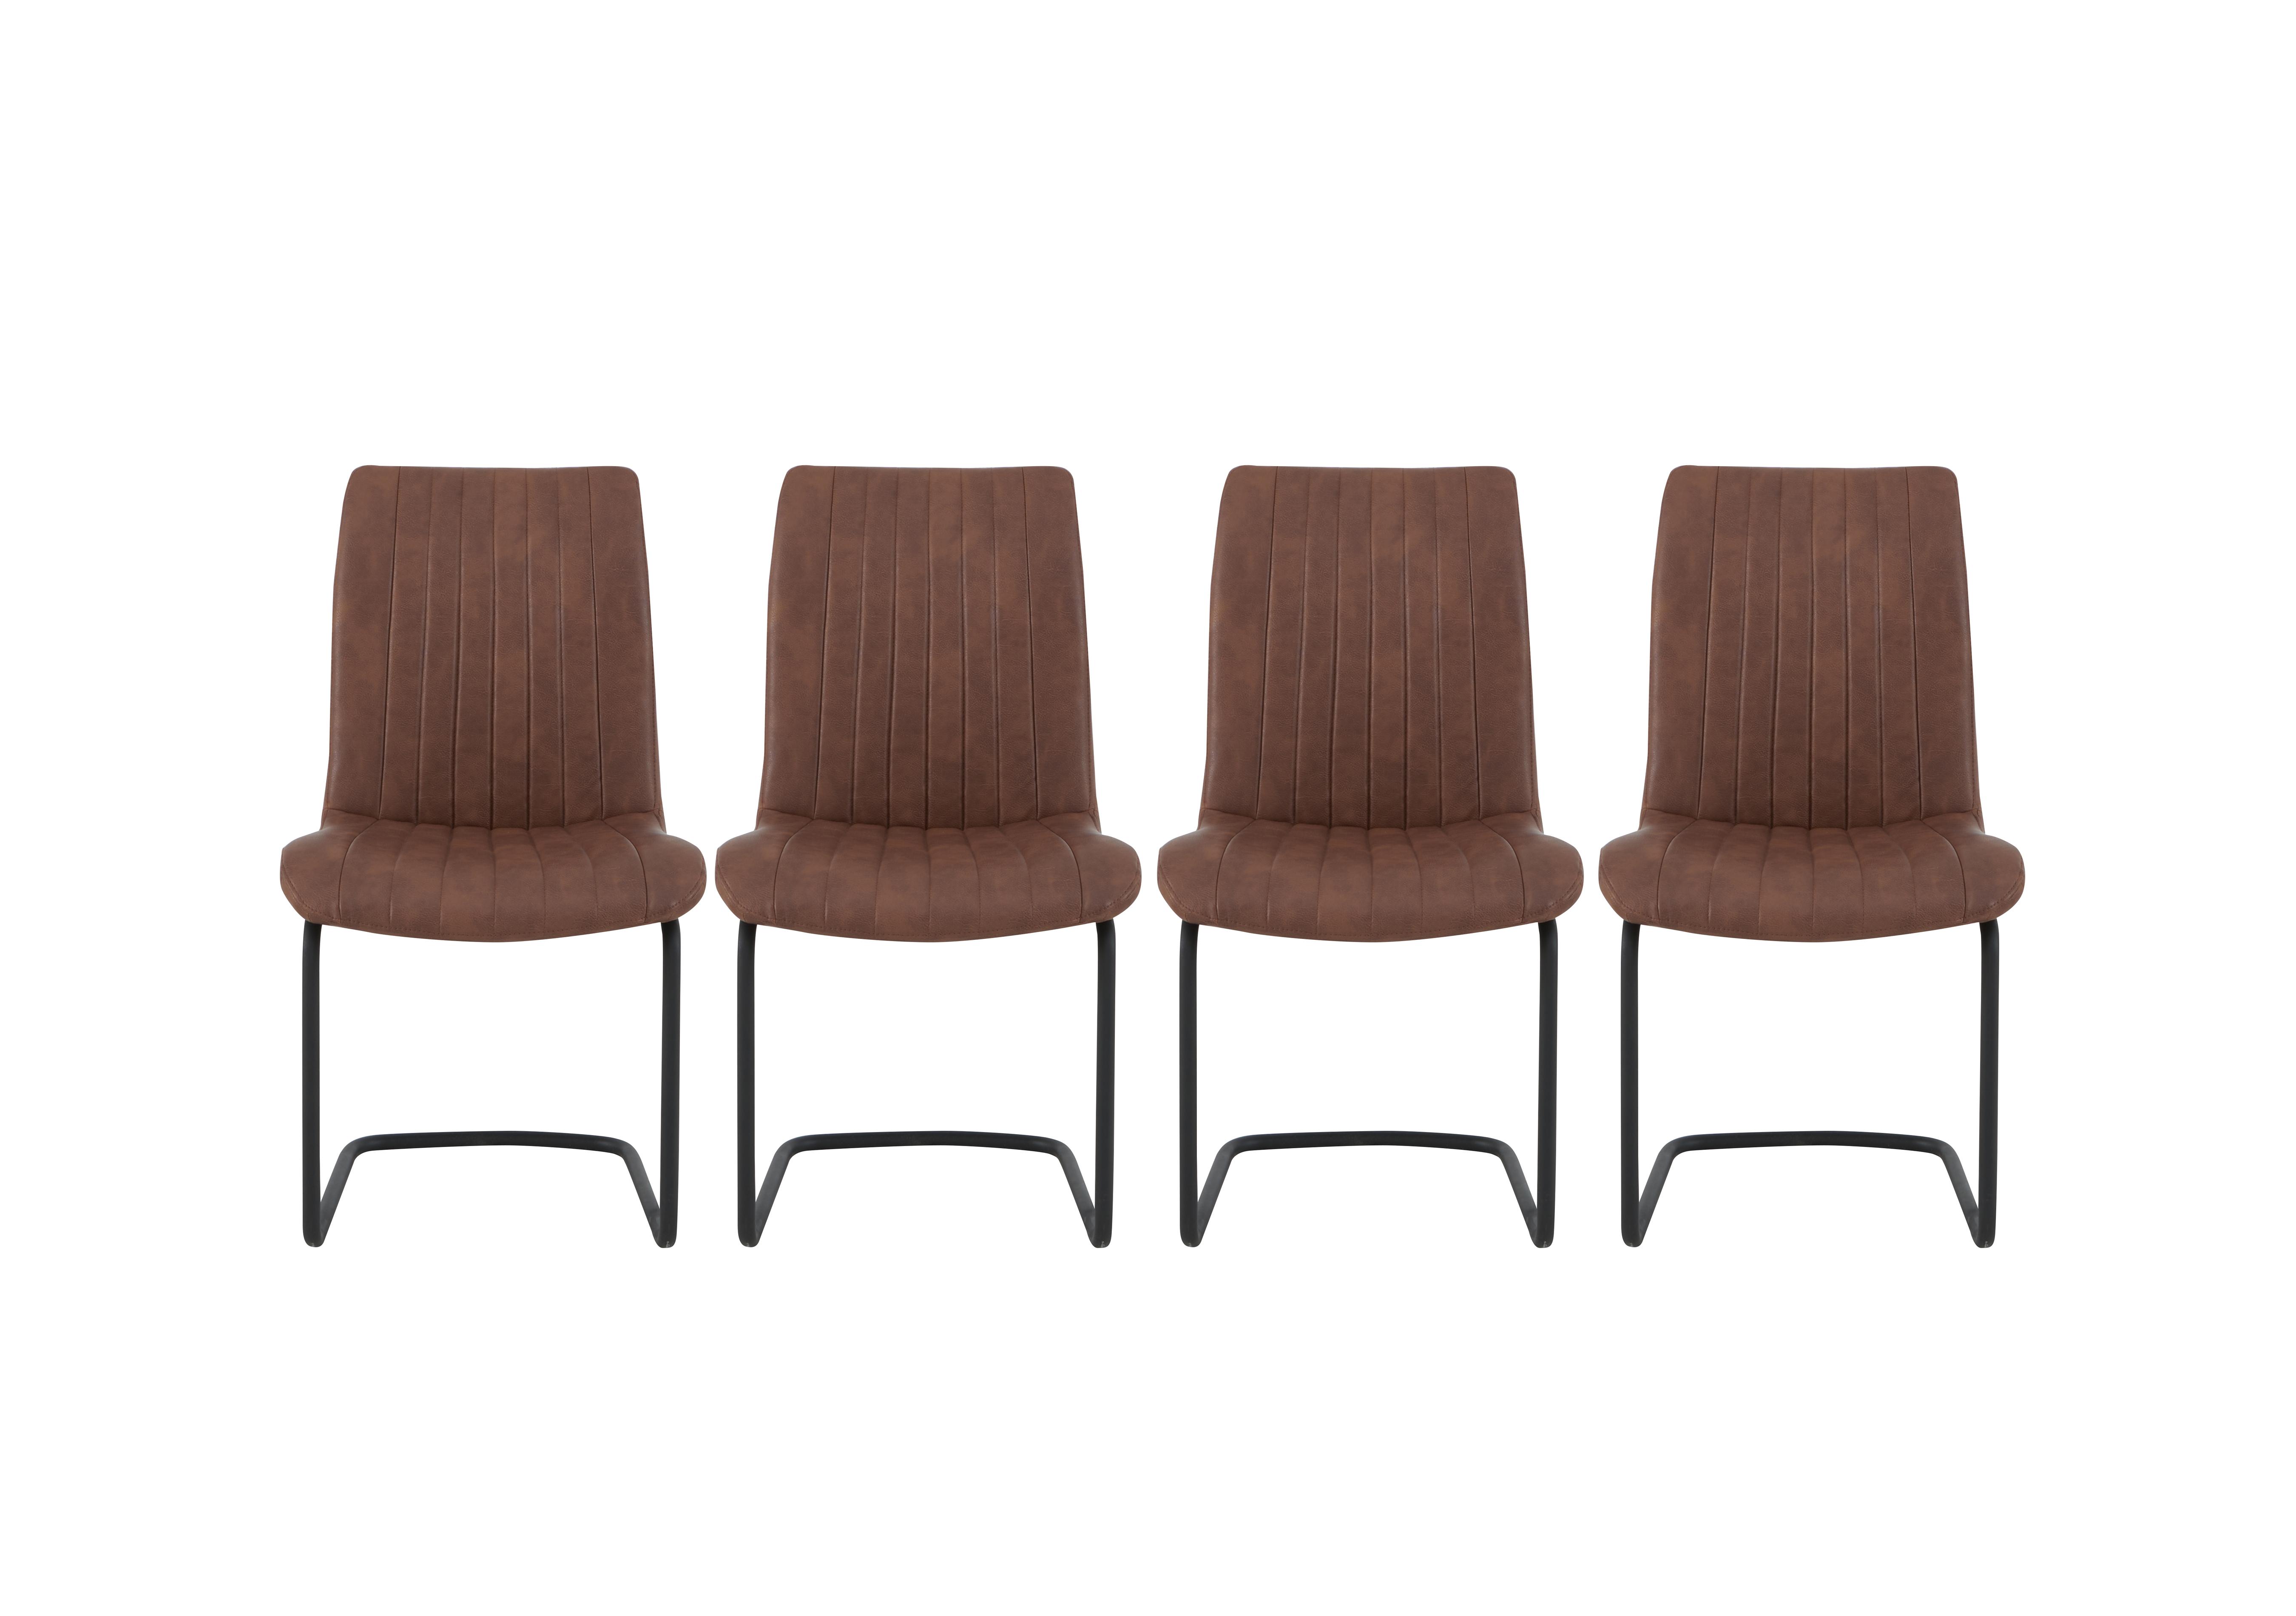 Terra Set of 4 Dining Chairs in Cognac on Furniture Village